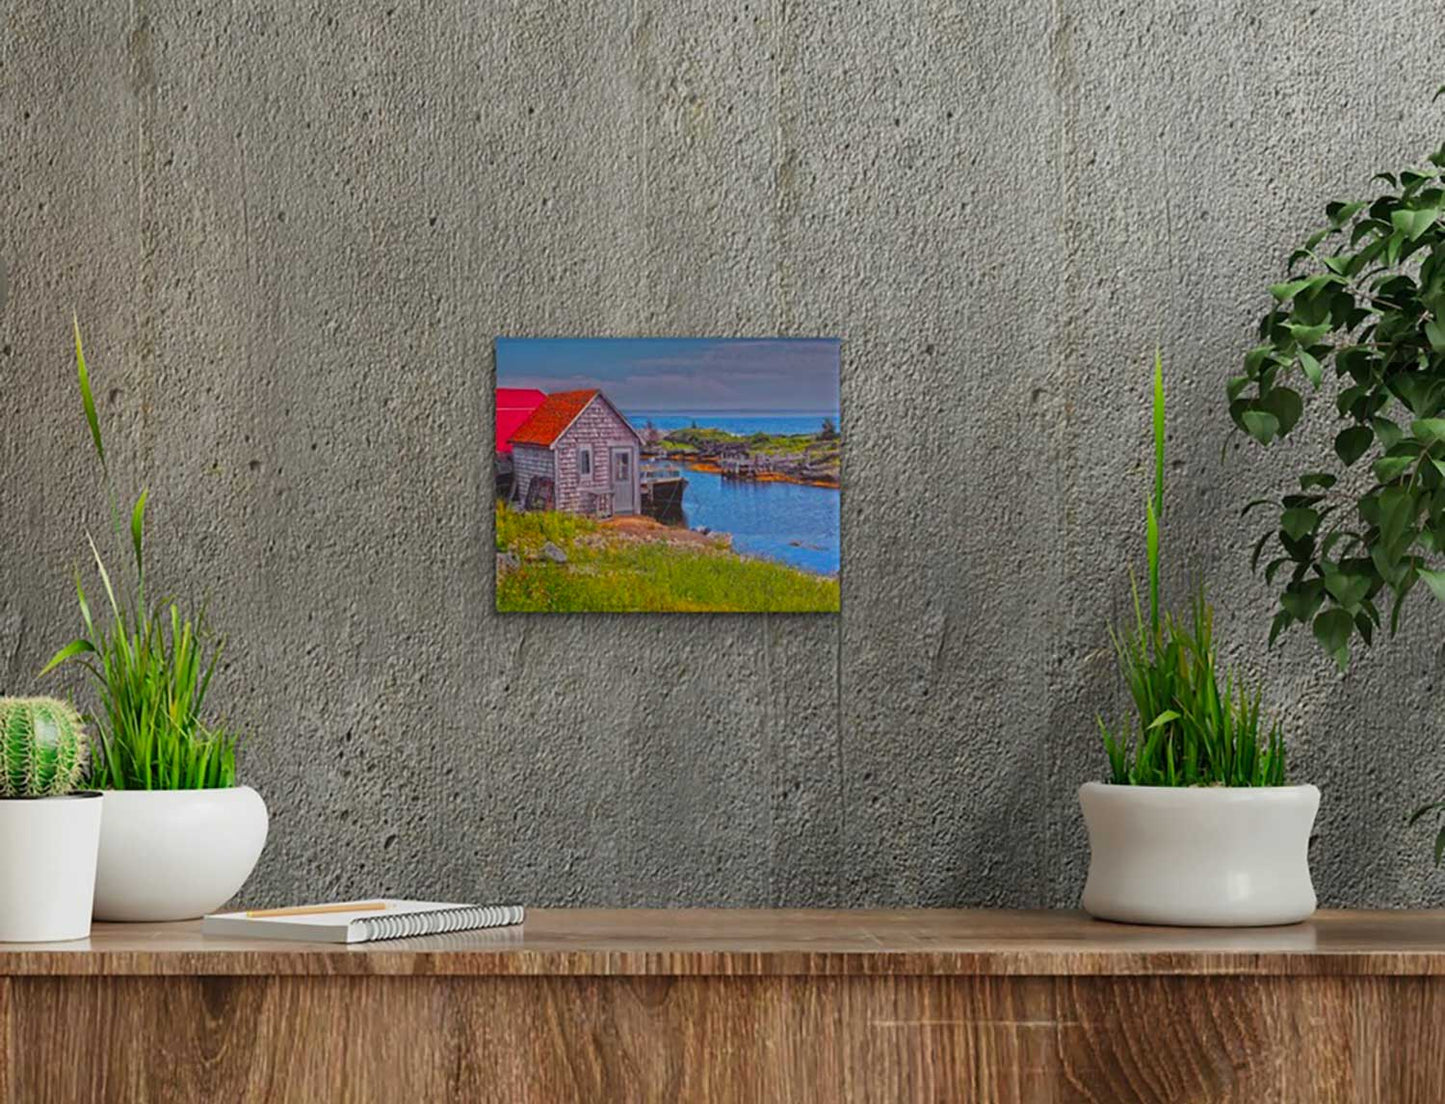 Spectacular view of Blue Rocks harbour featuring a picturesque shingle cabin.   Photography 8 x 10 inches covered with resin. Ready-to-hang in your favorite room.